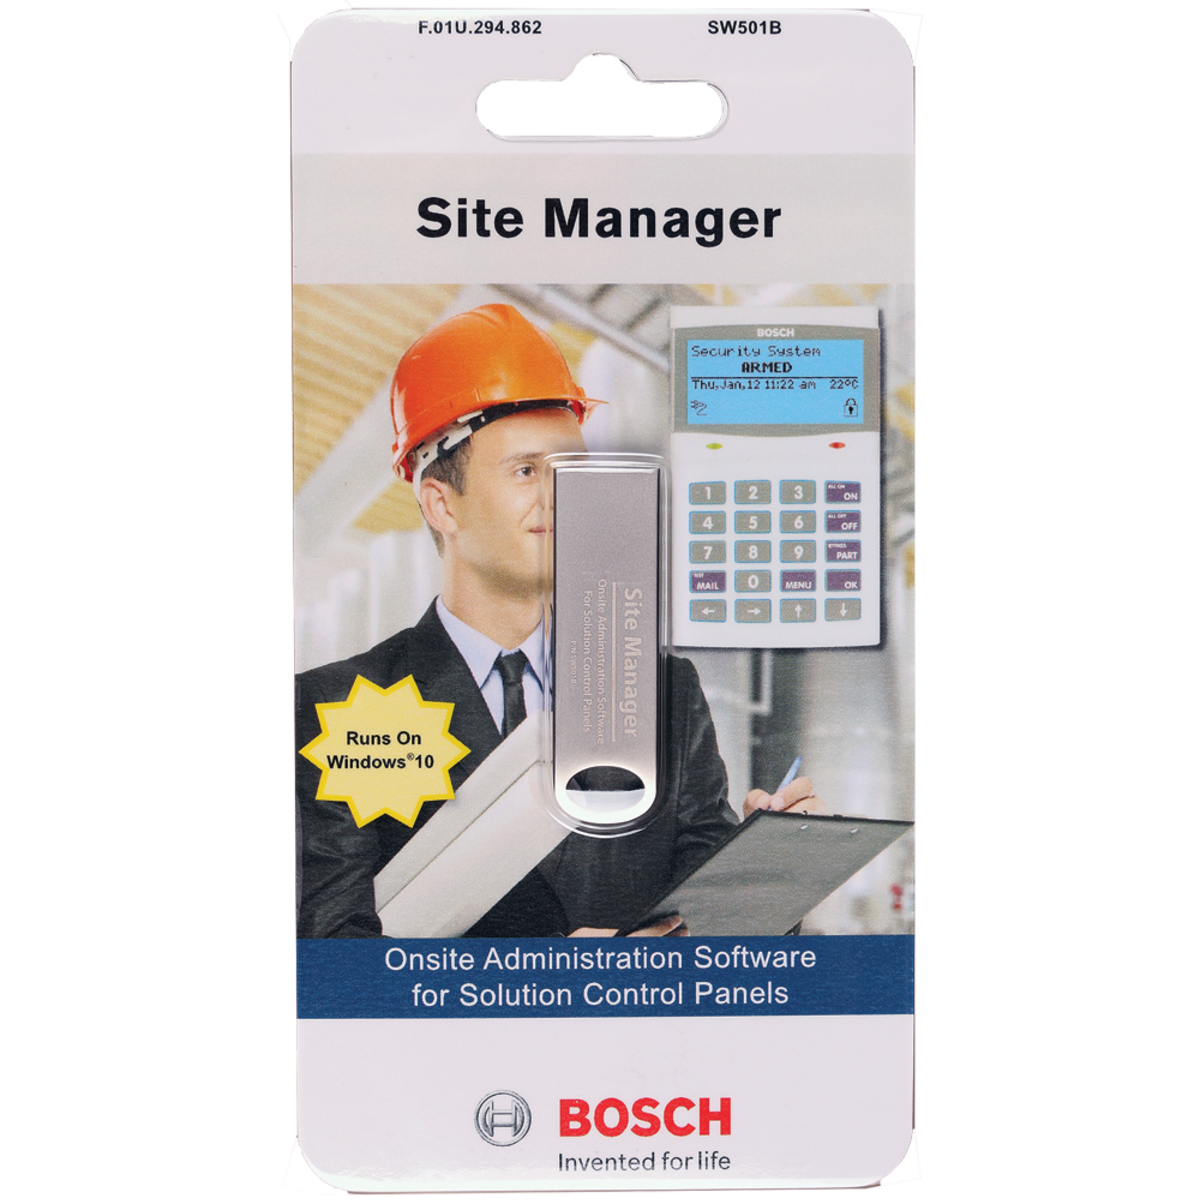 BOSCH SITE MANAGER SOFTWARE USB END USER SOFTWARE TO CONTROL SOL6000 INTERACTIVE CONTROL OF DOORS & OUTPUTS REQUIRES CM751B NOT CP741B